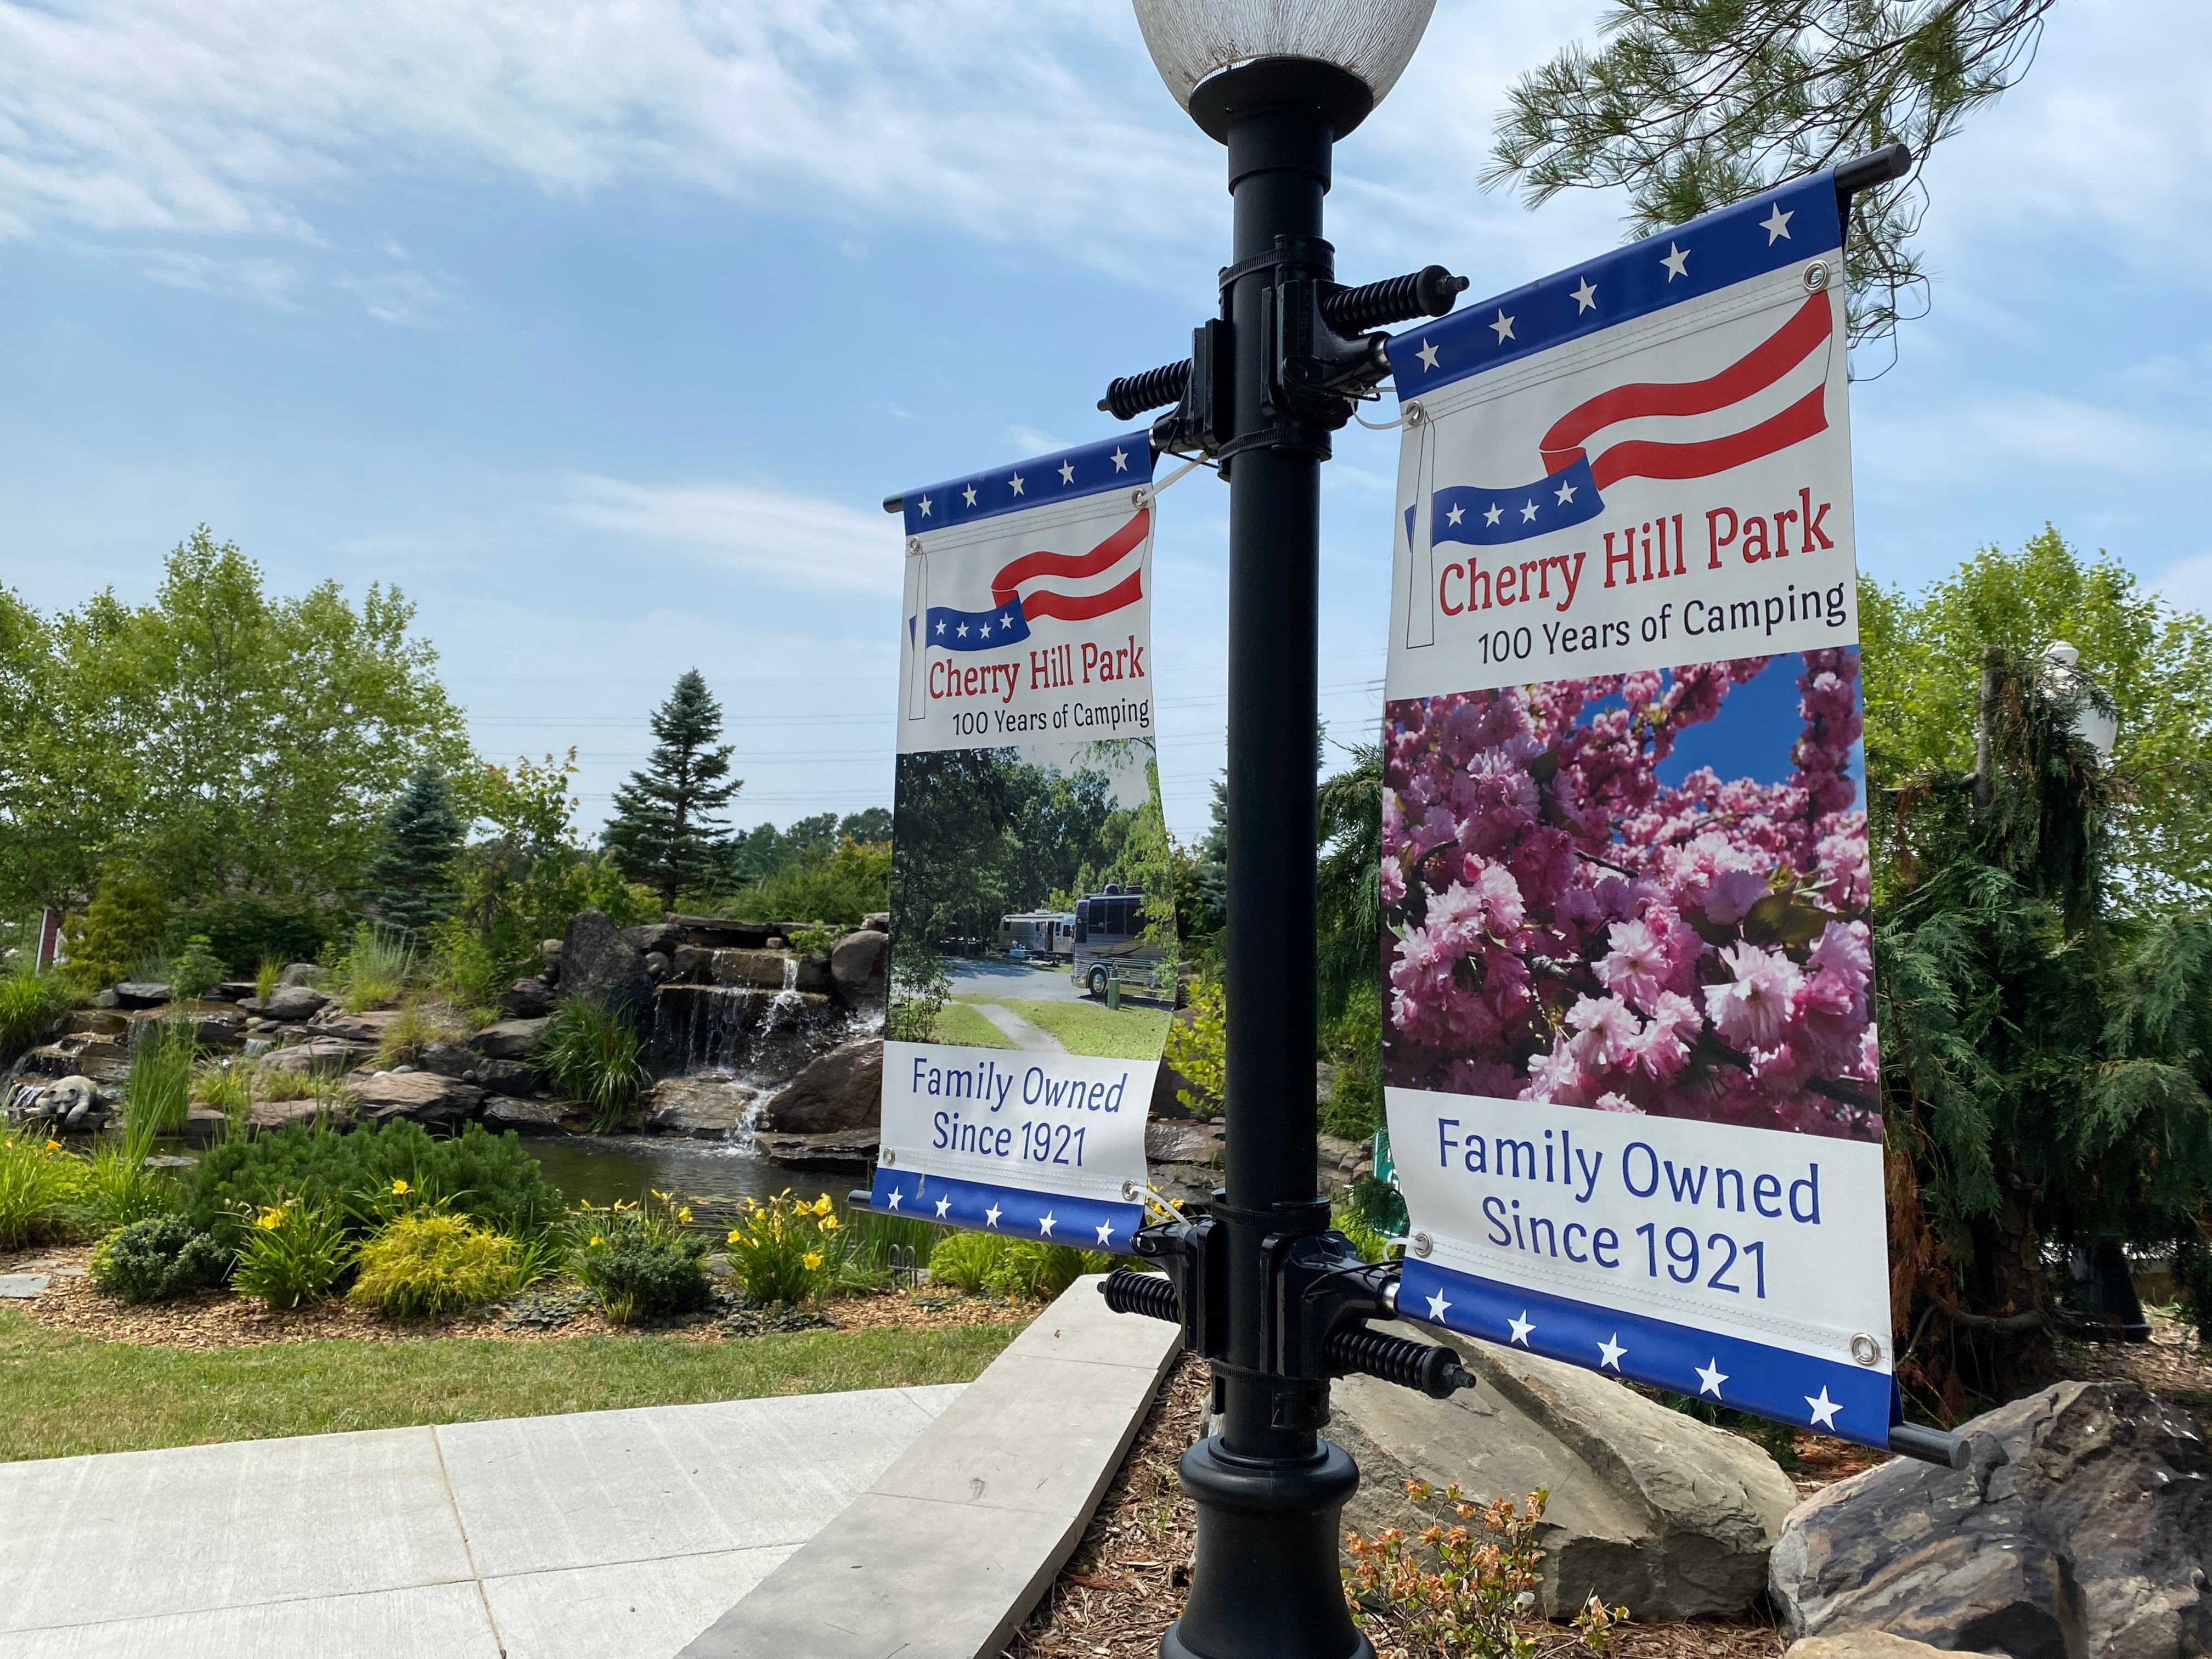 Lampposts with signs indicating Cherry Hill Park attached with nice landscaping in background.